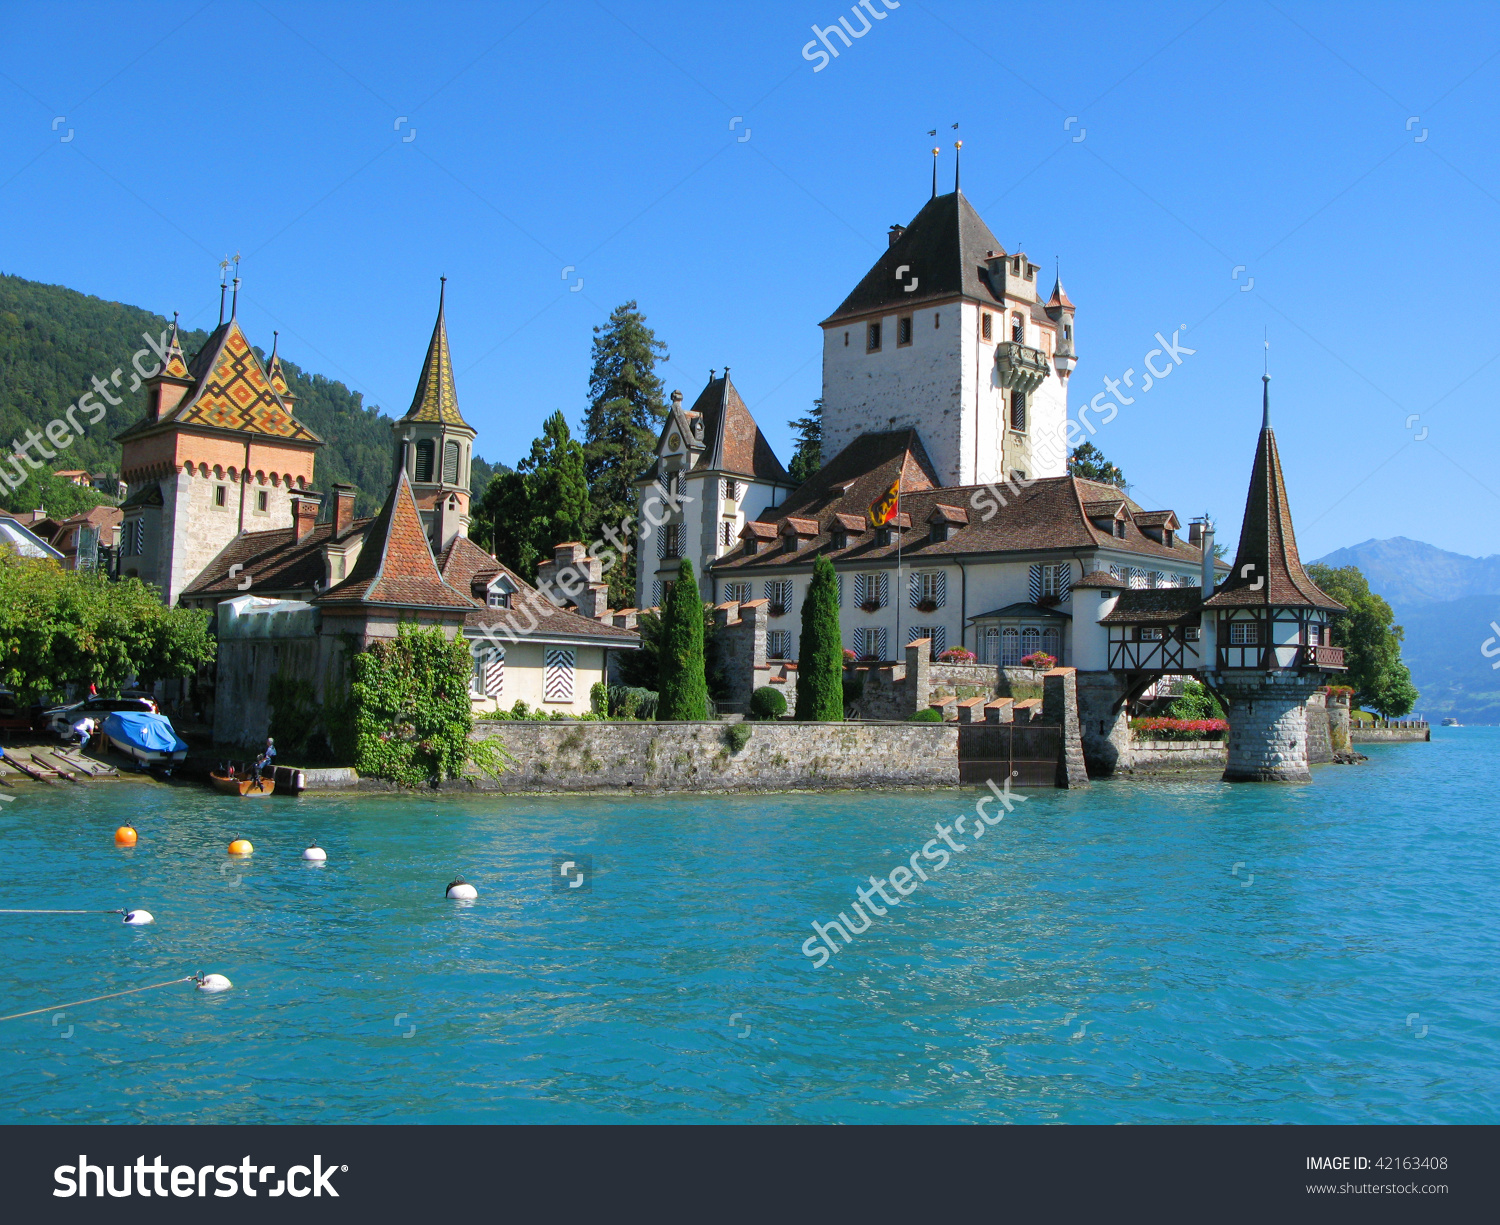 Oberhofen Castle Pics, Man Made Collection